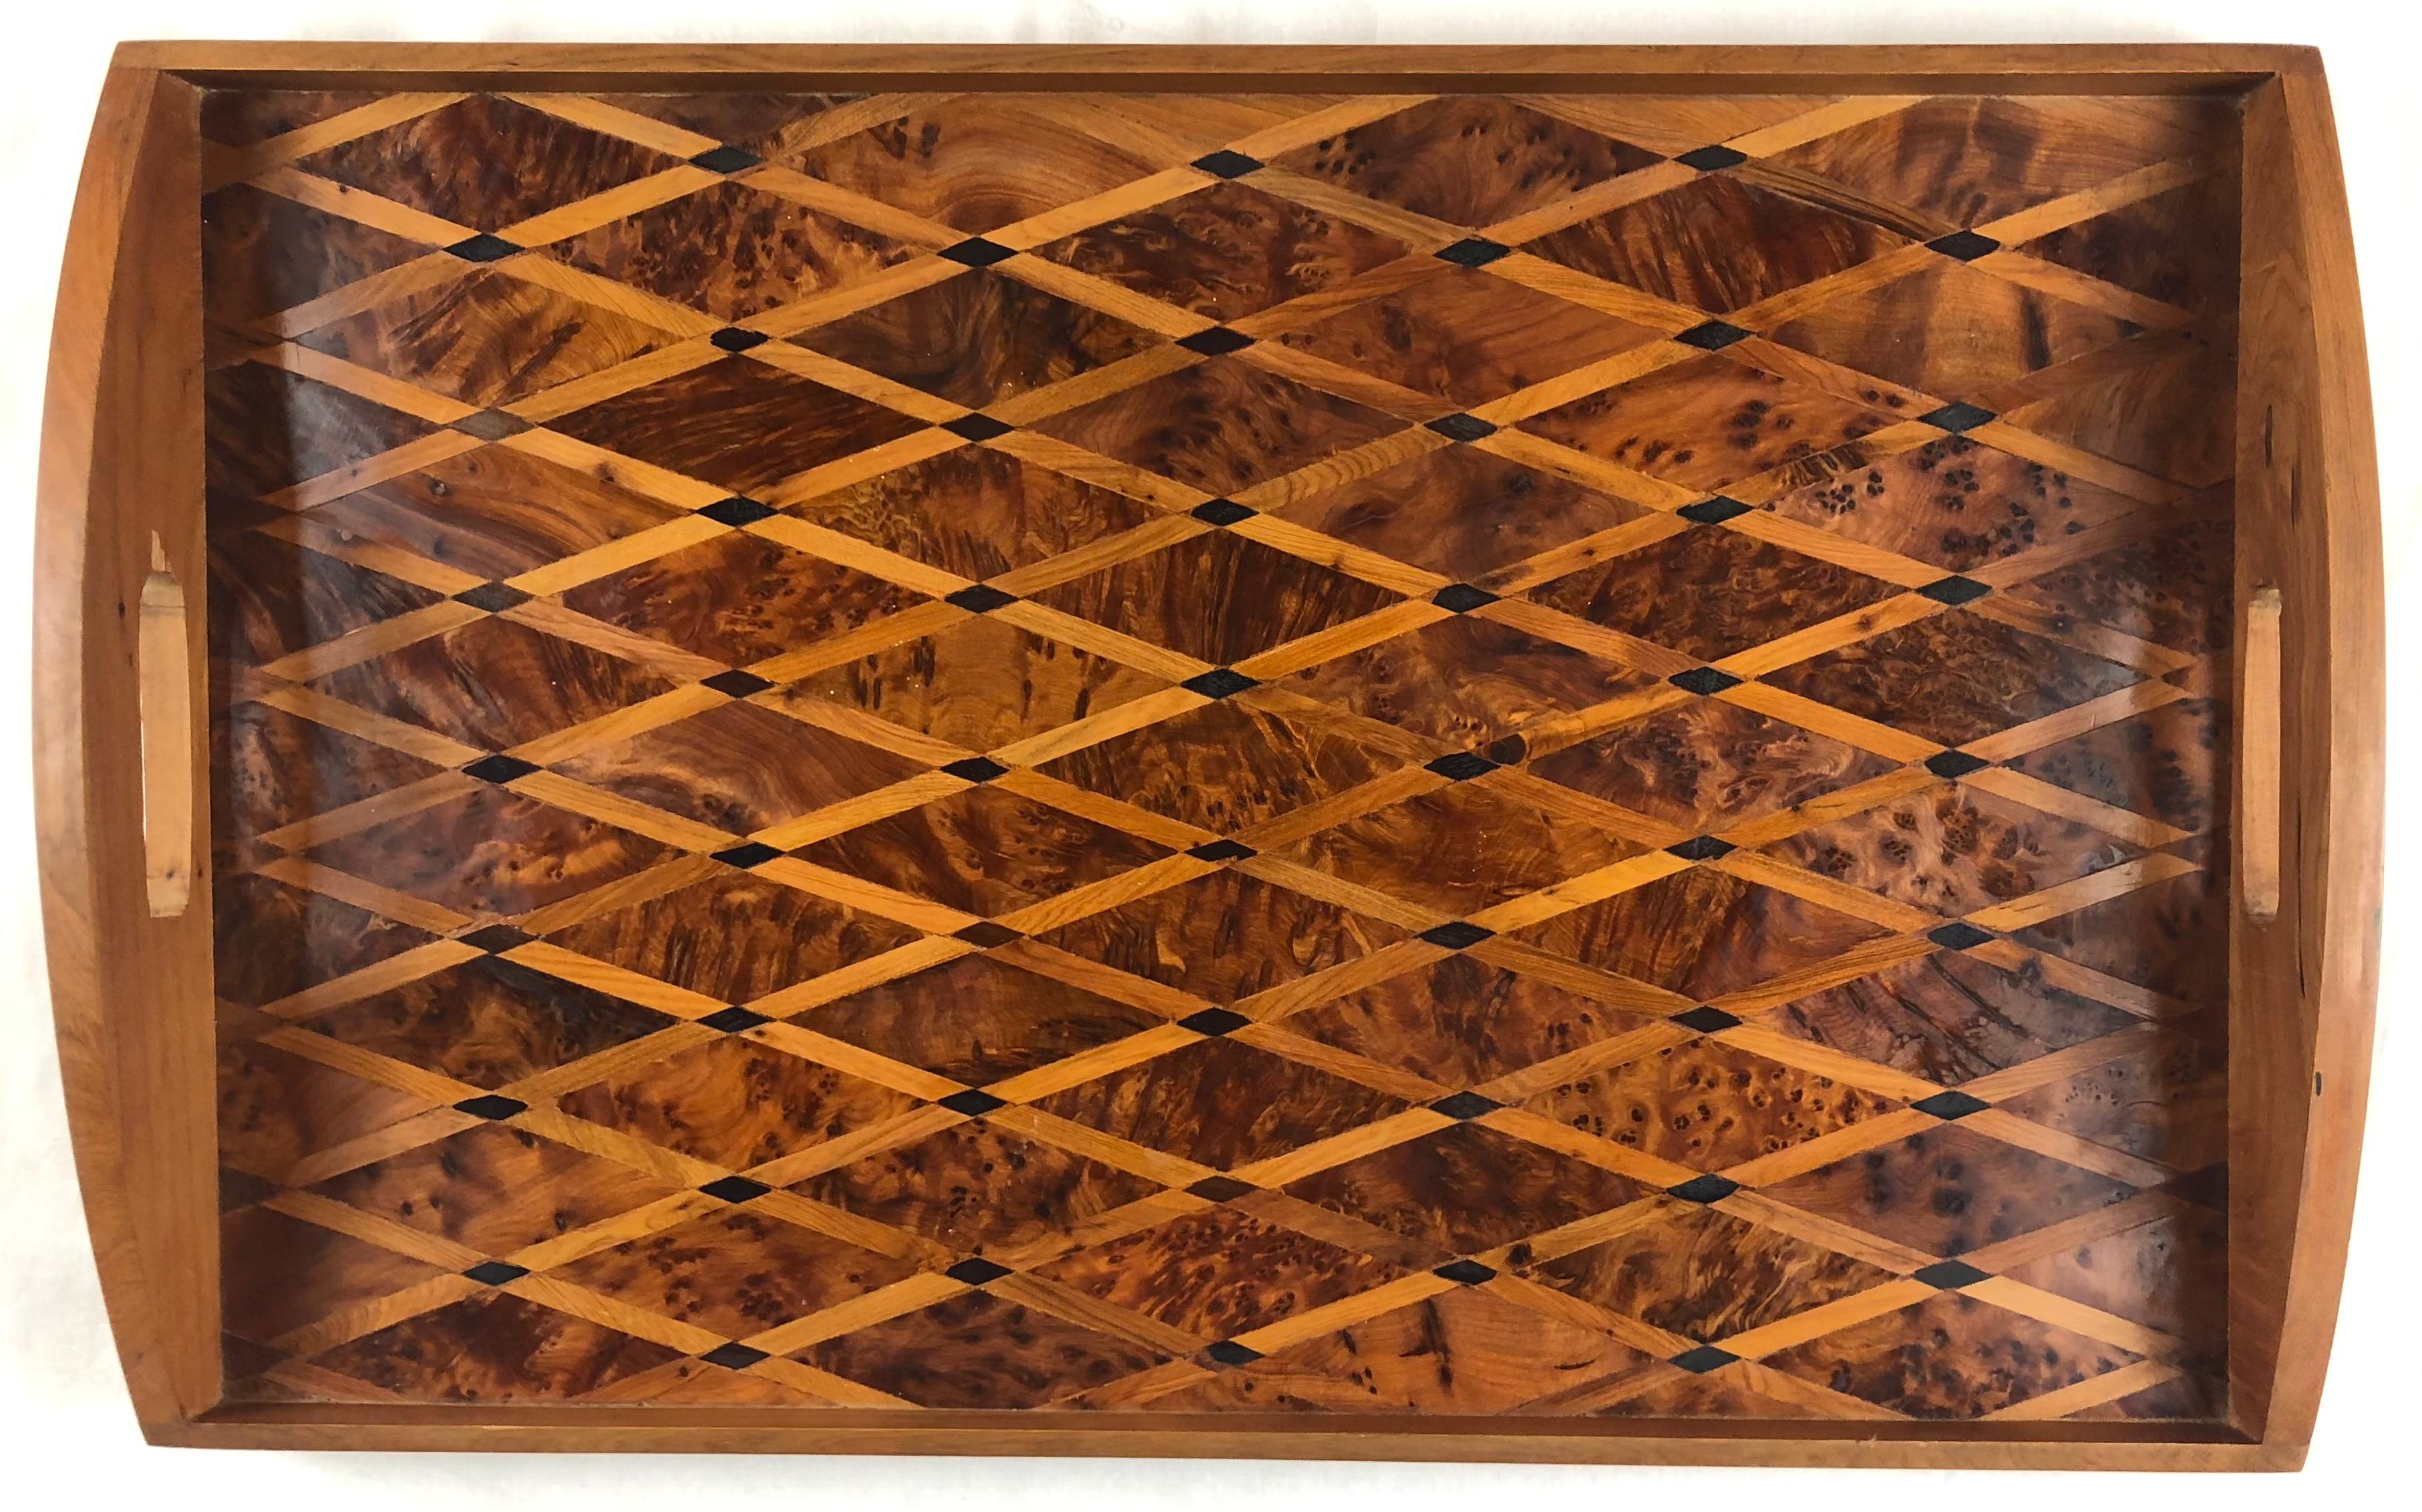 A lovely French art deco wood serving tray. 

This elegant tray features beautiful handles, is sturdy enough to use daily. This is a very good example of the period perfect style for collectors, or for someone simply looking for a tray to present